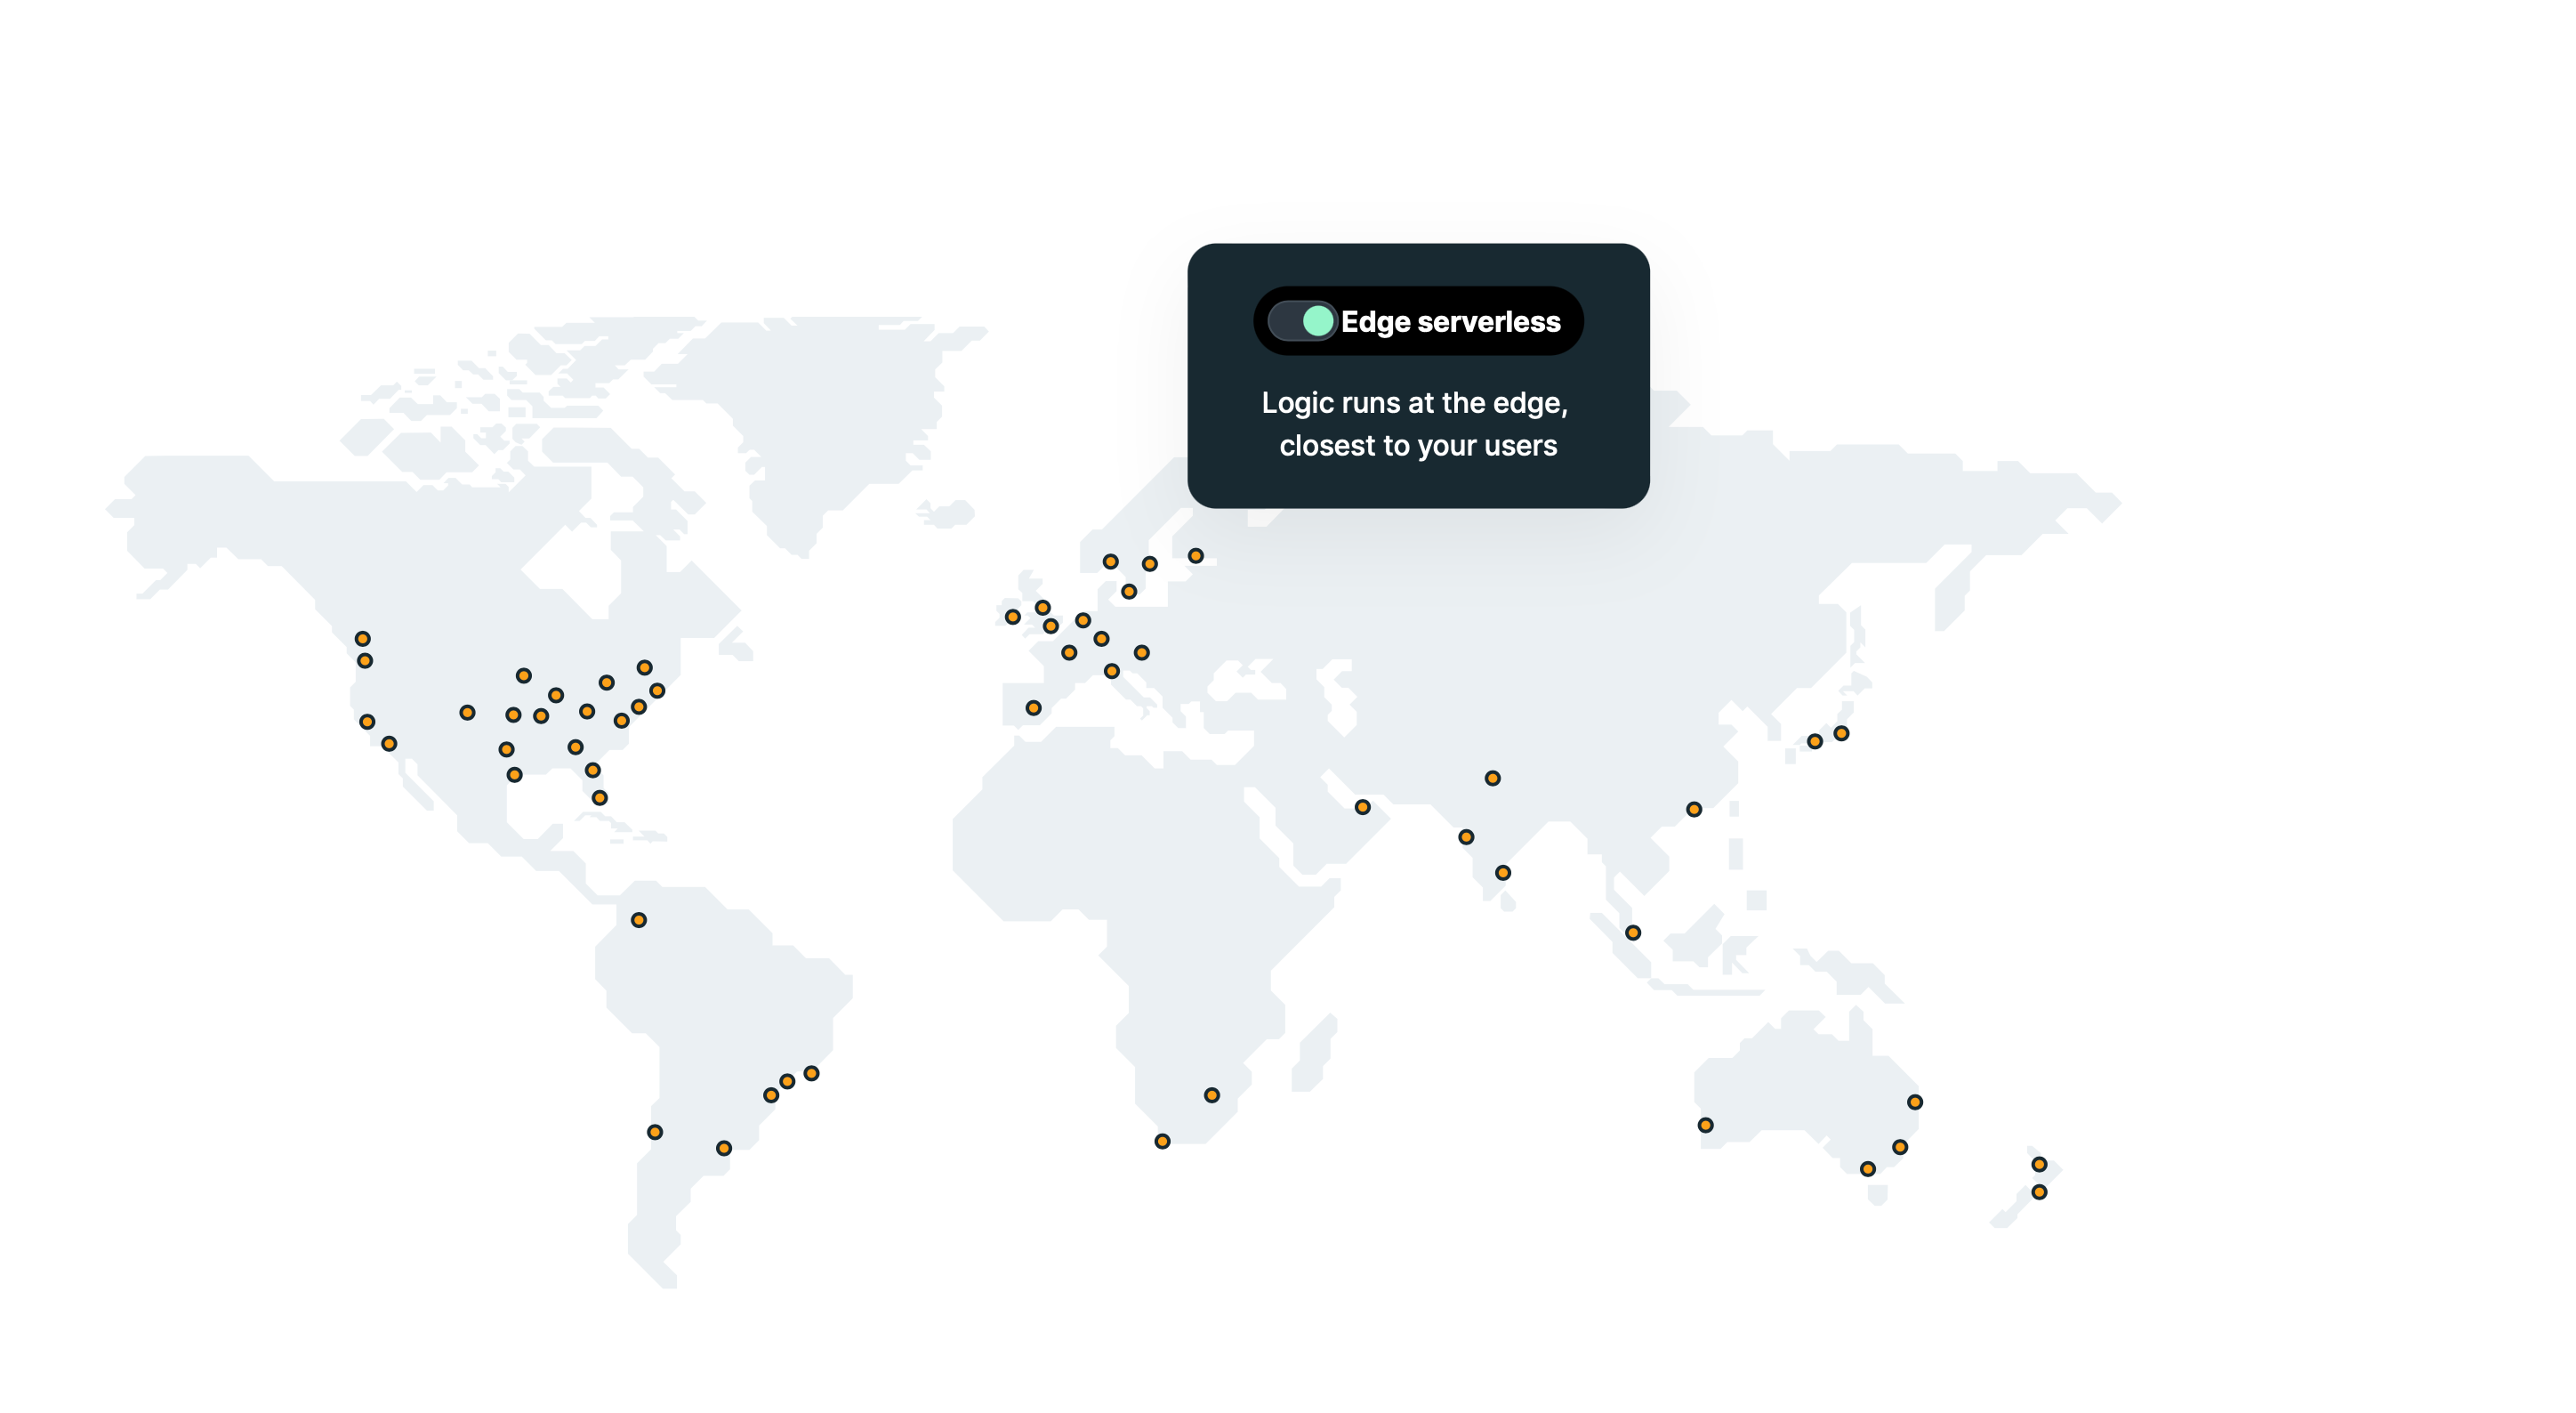 An image showing the edge function locations worldwide for Fastly edge computing applications